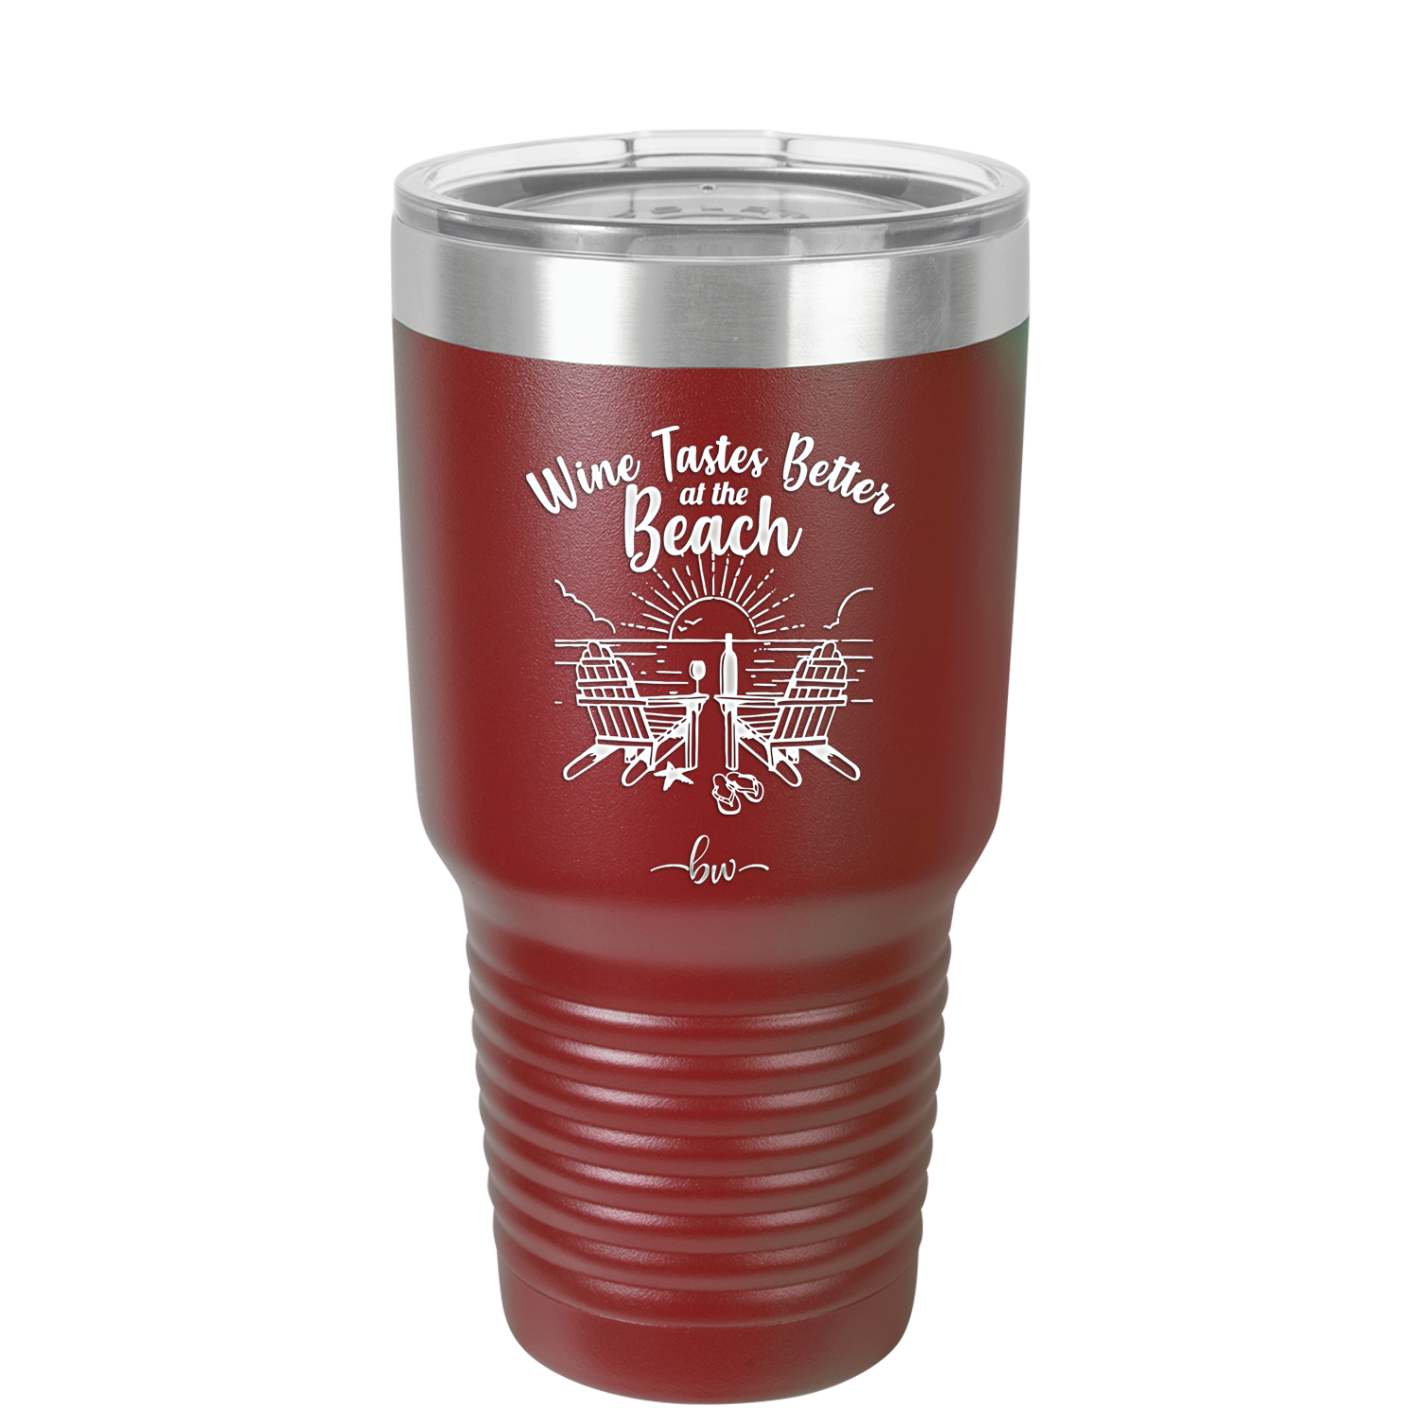 Wine Tastes Better at the Beach - Laser Engraved Stainless Steel Drinkware - 1610 -